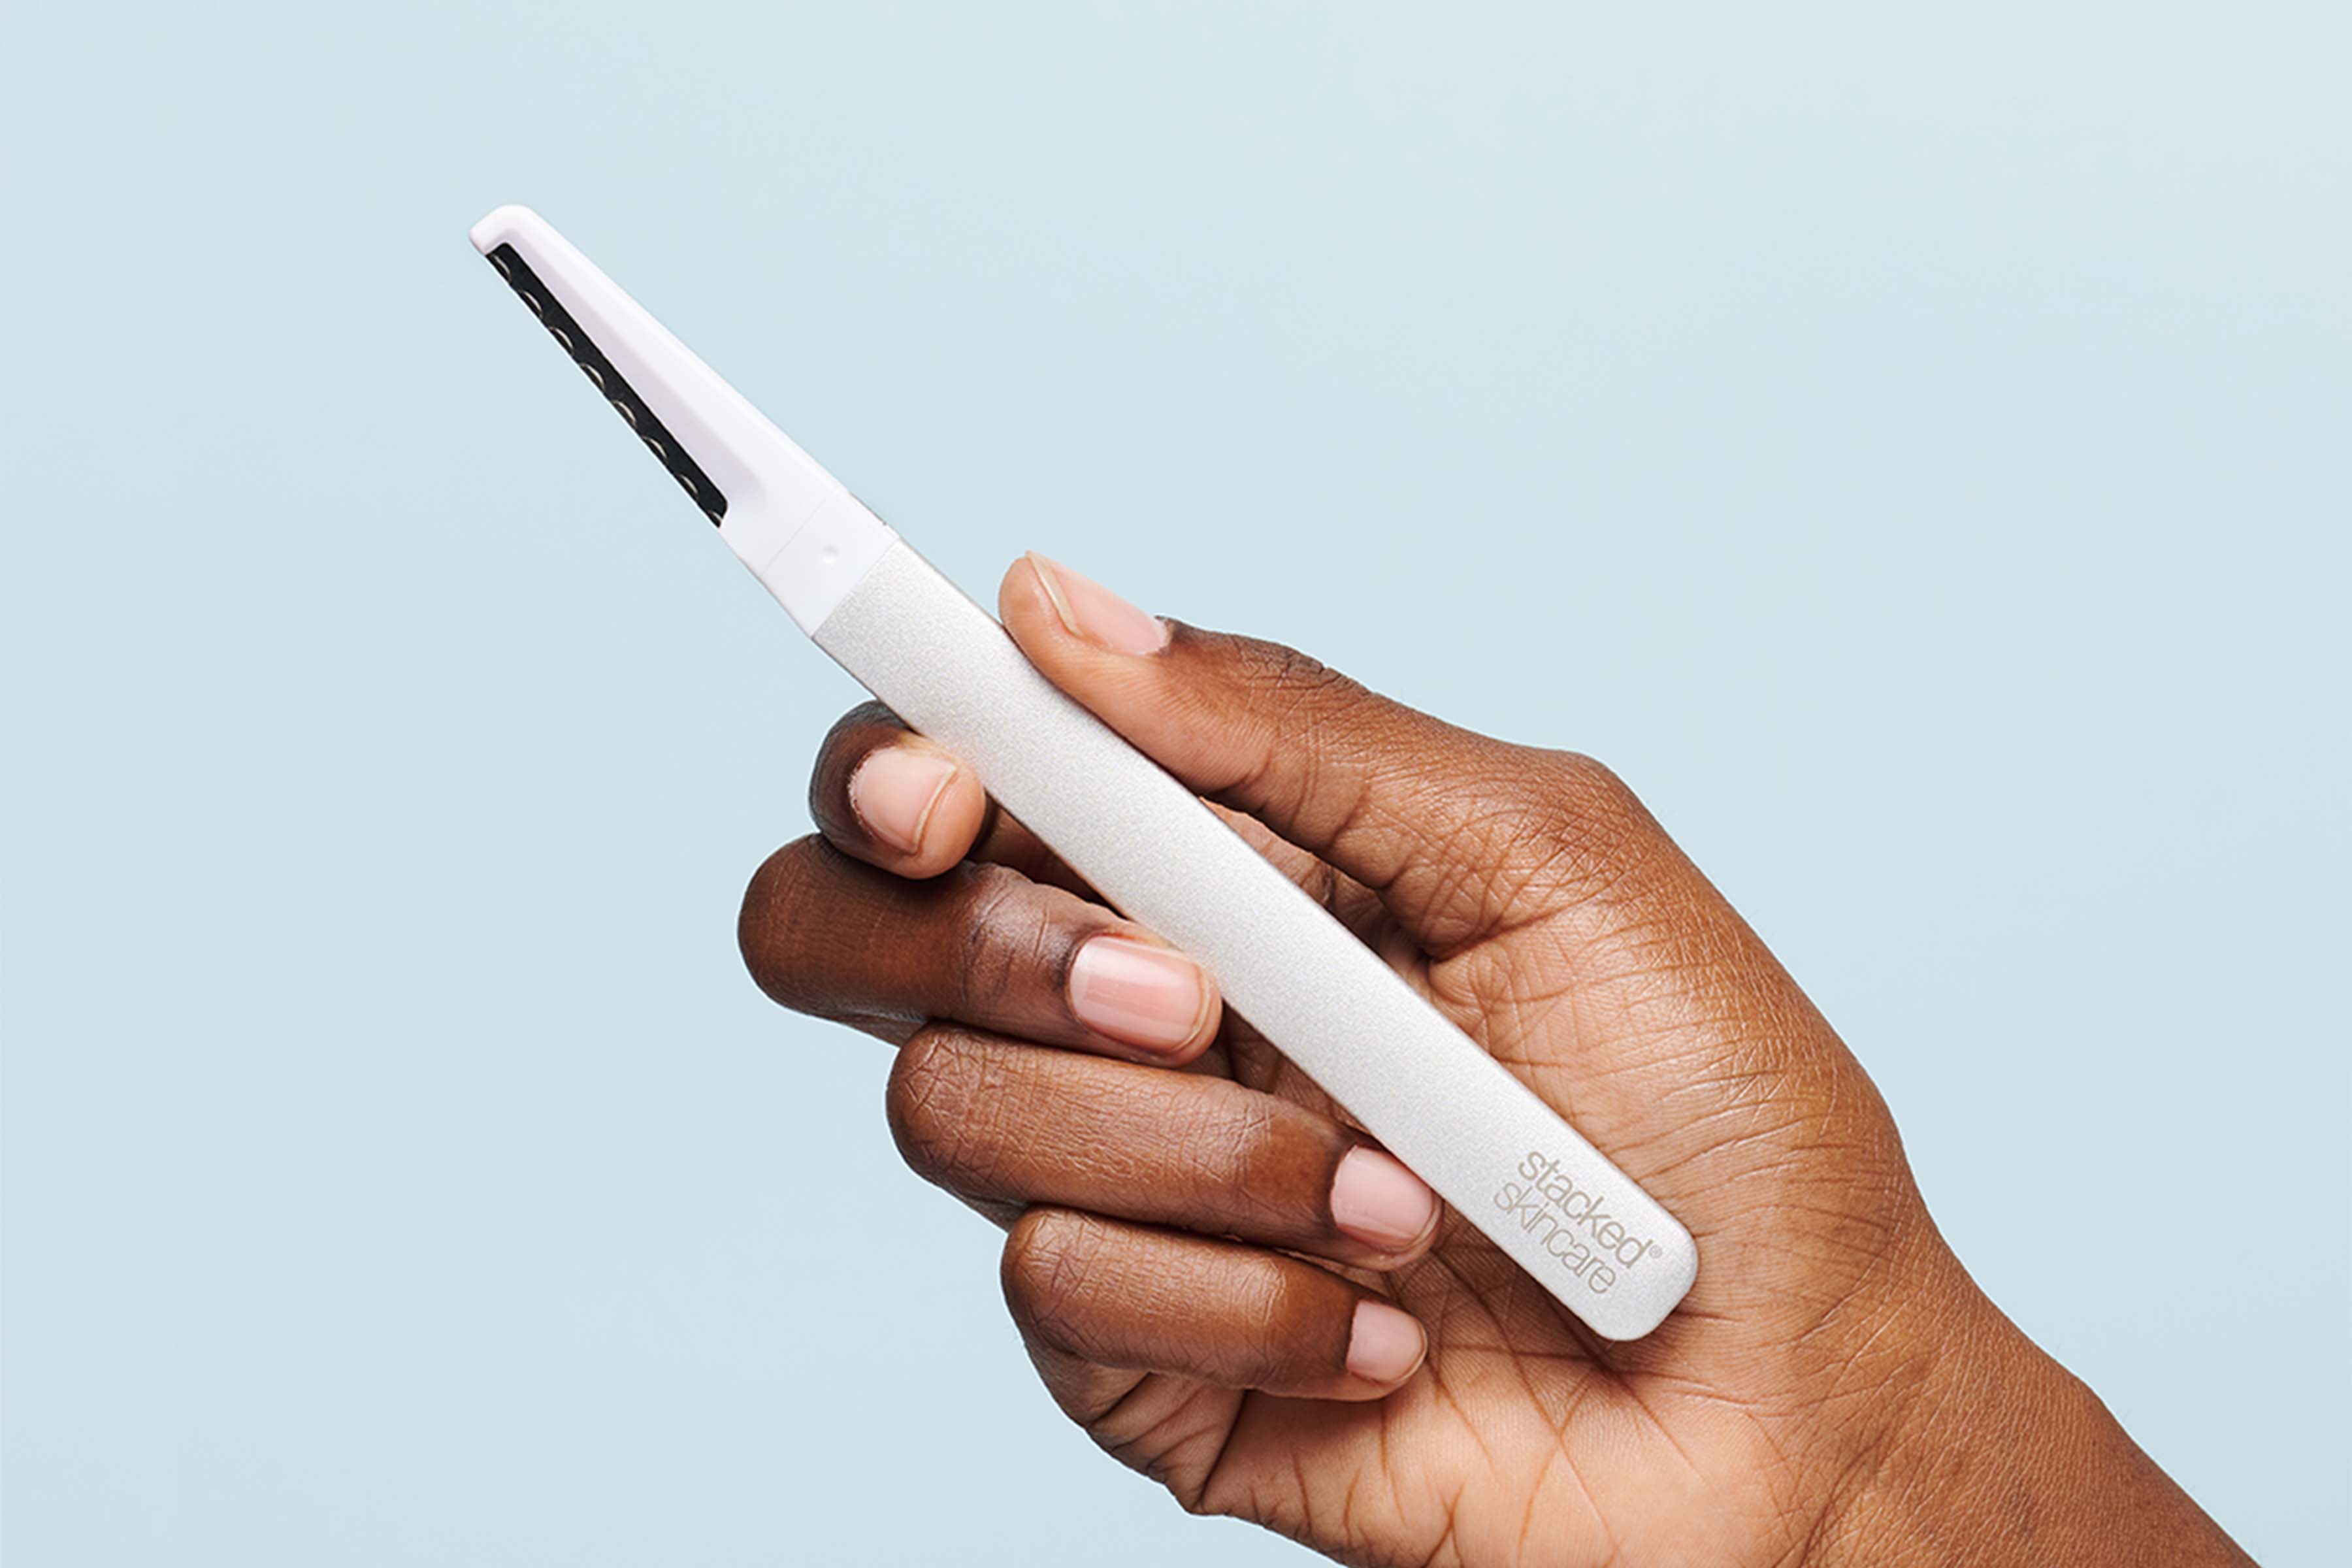 How The Dermaplaning Tool Compares To Other At-Home Dermaplaning Devices